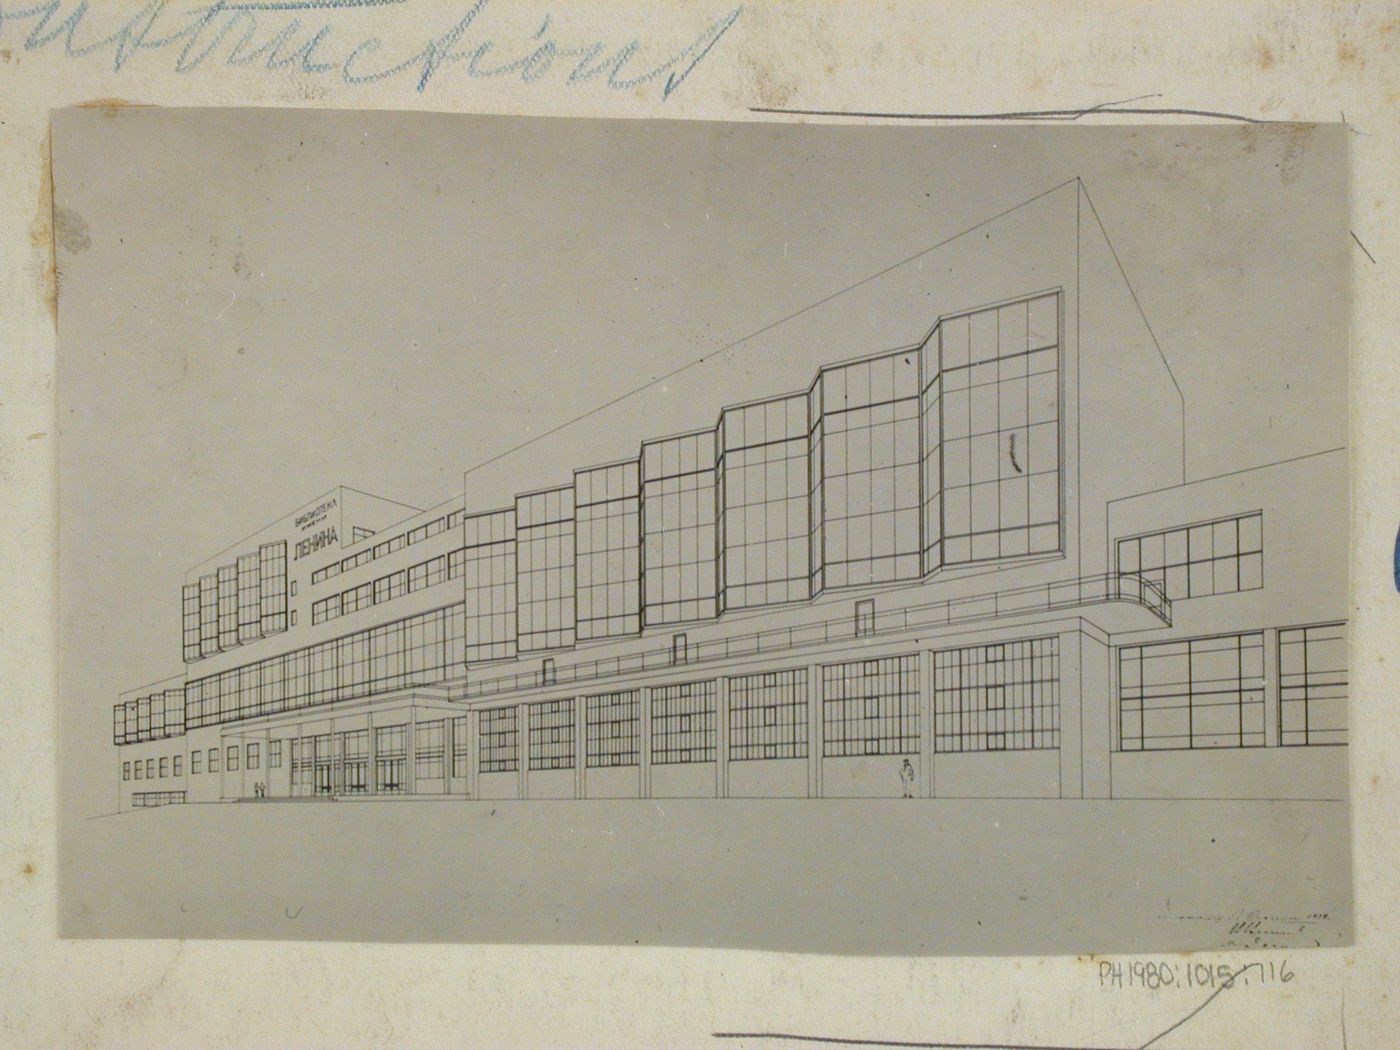 View of an elevation drawing for a train station, U.S.S.R. (now Russia)